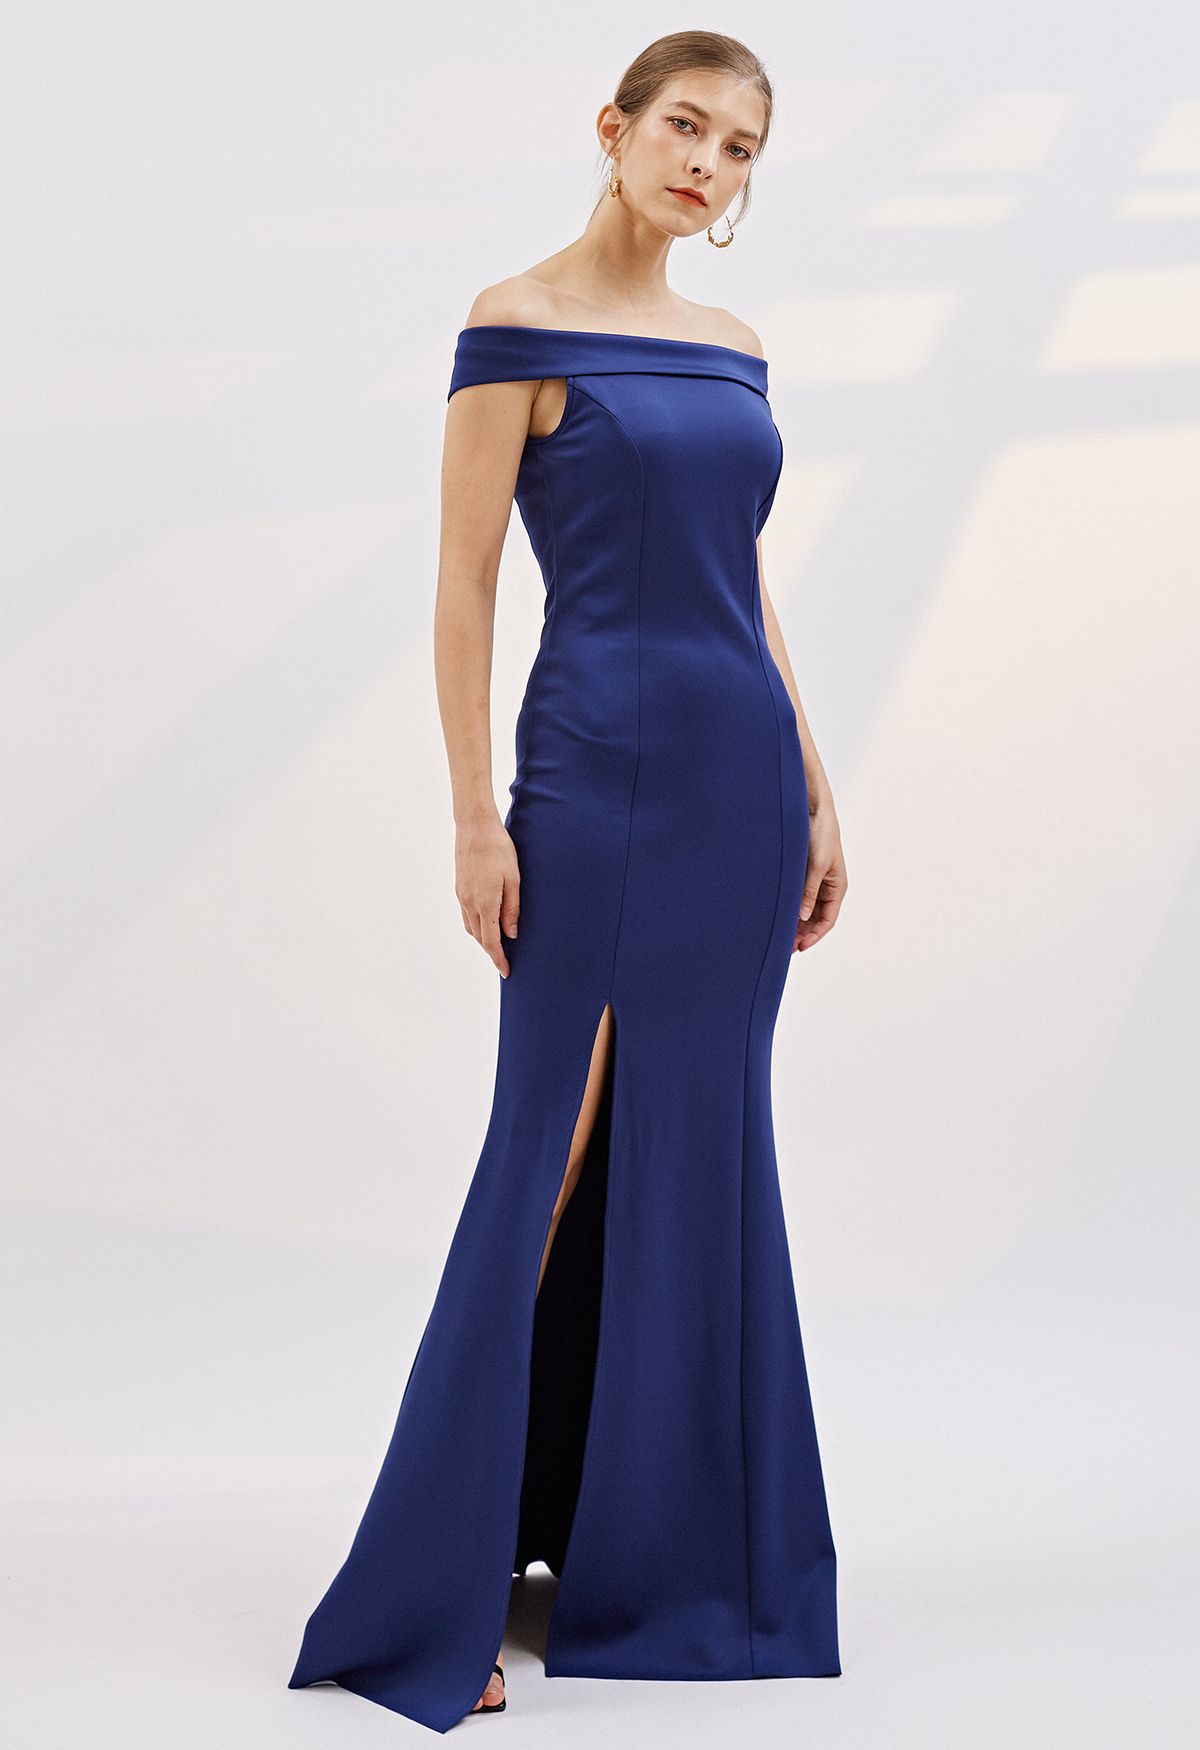 Folded Off-Shoulder Slit Mermaid Gown in Navy - Retro, Indie and Unique ...